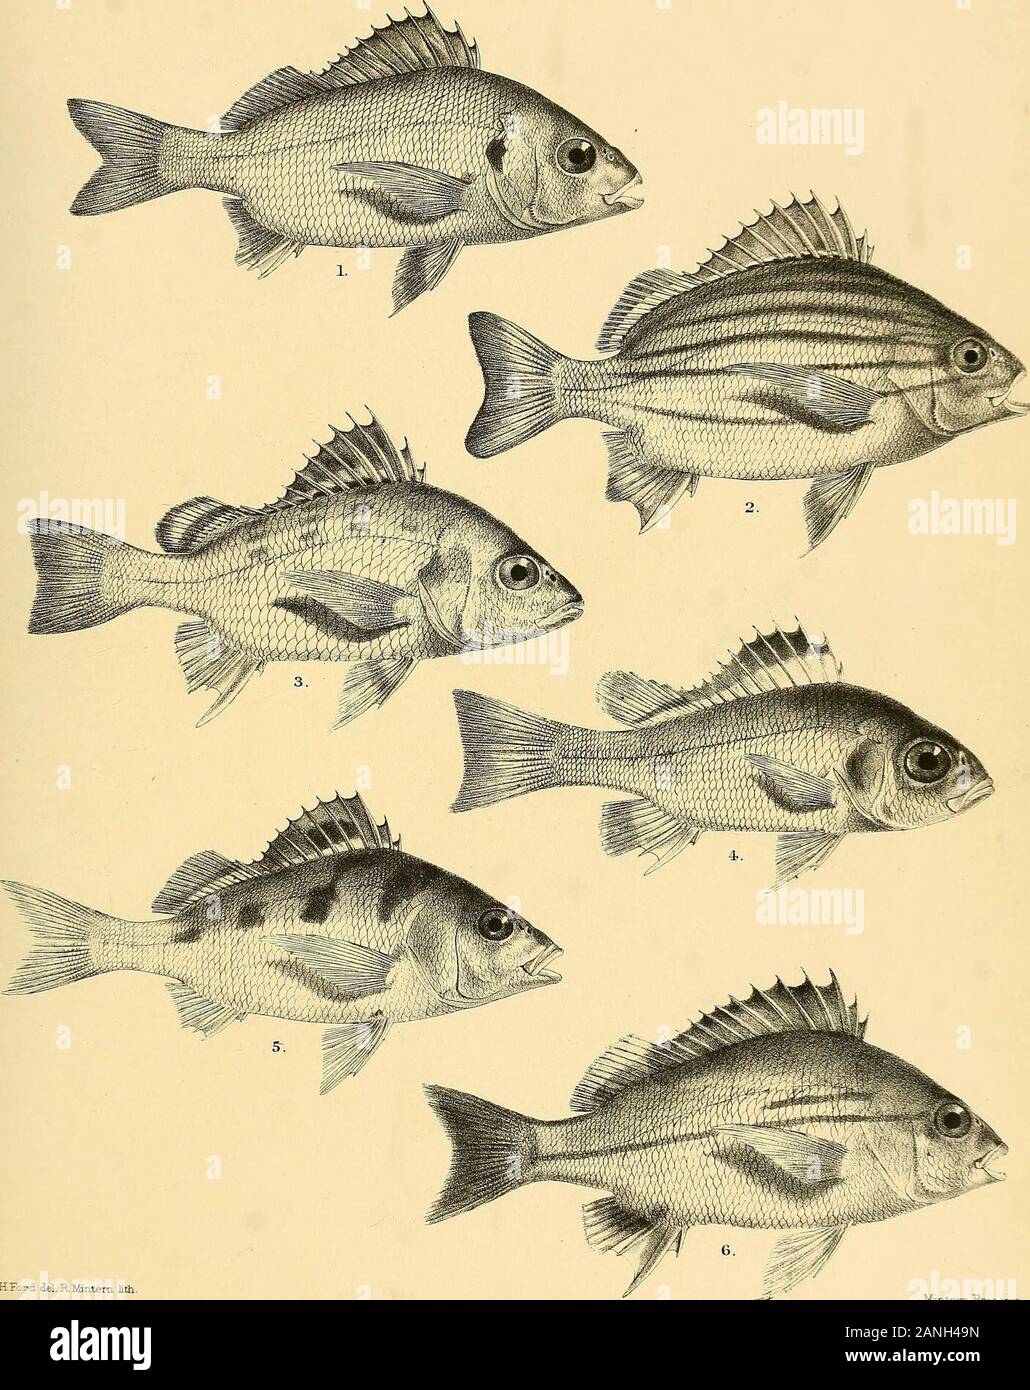 The fishes of India; being a natural history of the fishes known to inhabit the seas and fresh waters of India, Burma, and Ceylon . ifintem Bros.imp. 1, DULES MARGINATUS. 2. D. ARGENTEUS. 3. THE RAP ON PUTA. 4.T. JARBUA. 5 T QUADRILTNEATuS(/6.T. THERAPS. 7. DATNIA ARGENTEA. 8.PRISTIP0MA NAGEB. Days Fishes of India. Rate XX. GHFord del.TtMmtem lith. Mmtem Bros .imp. 1, PRISTIPOMA 0L1VACEUM. 2. P. FURCATUM. 3.P. HASTA. 4 P HASTA f YOUNG -=-) 5. P. MACULATUM. 6. P. DUSSUMIERI. Days Fishes of India. • .-XX. Stock Photo